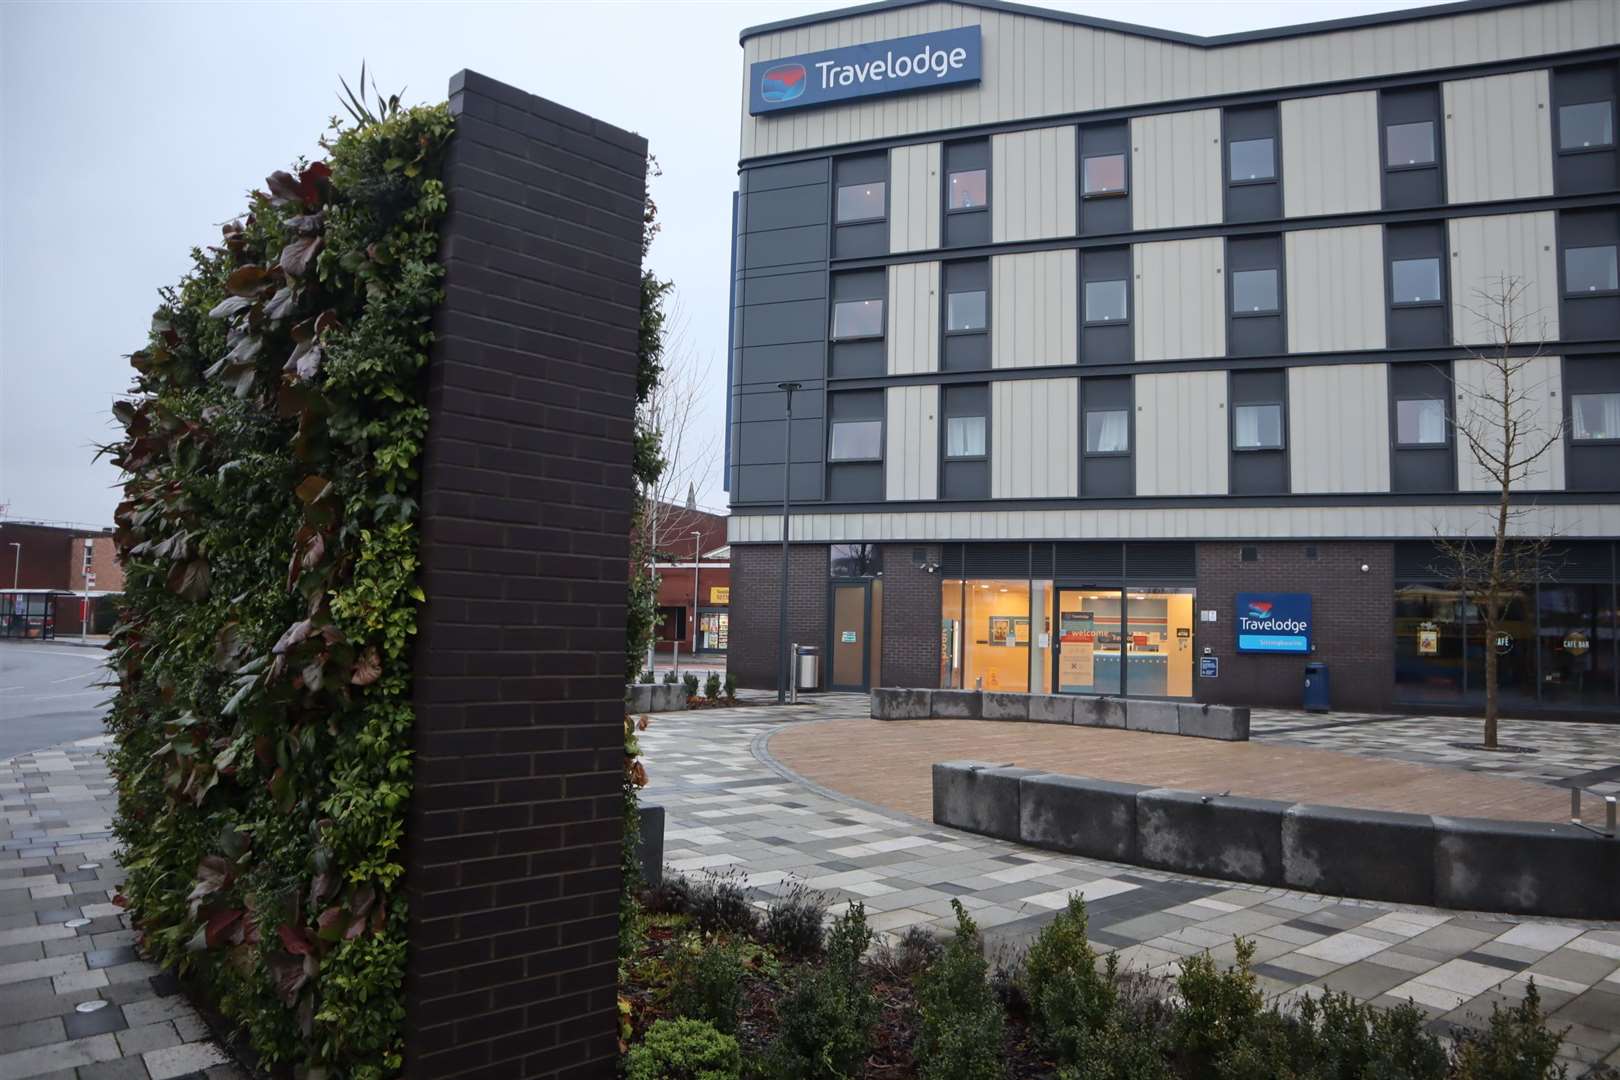 Sittingbourne Travelodge hotel with 'growing wall'